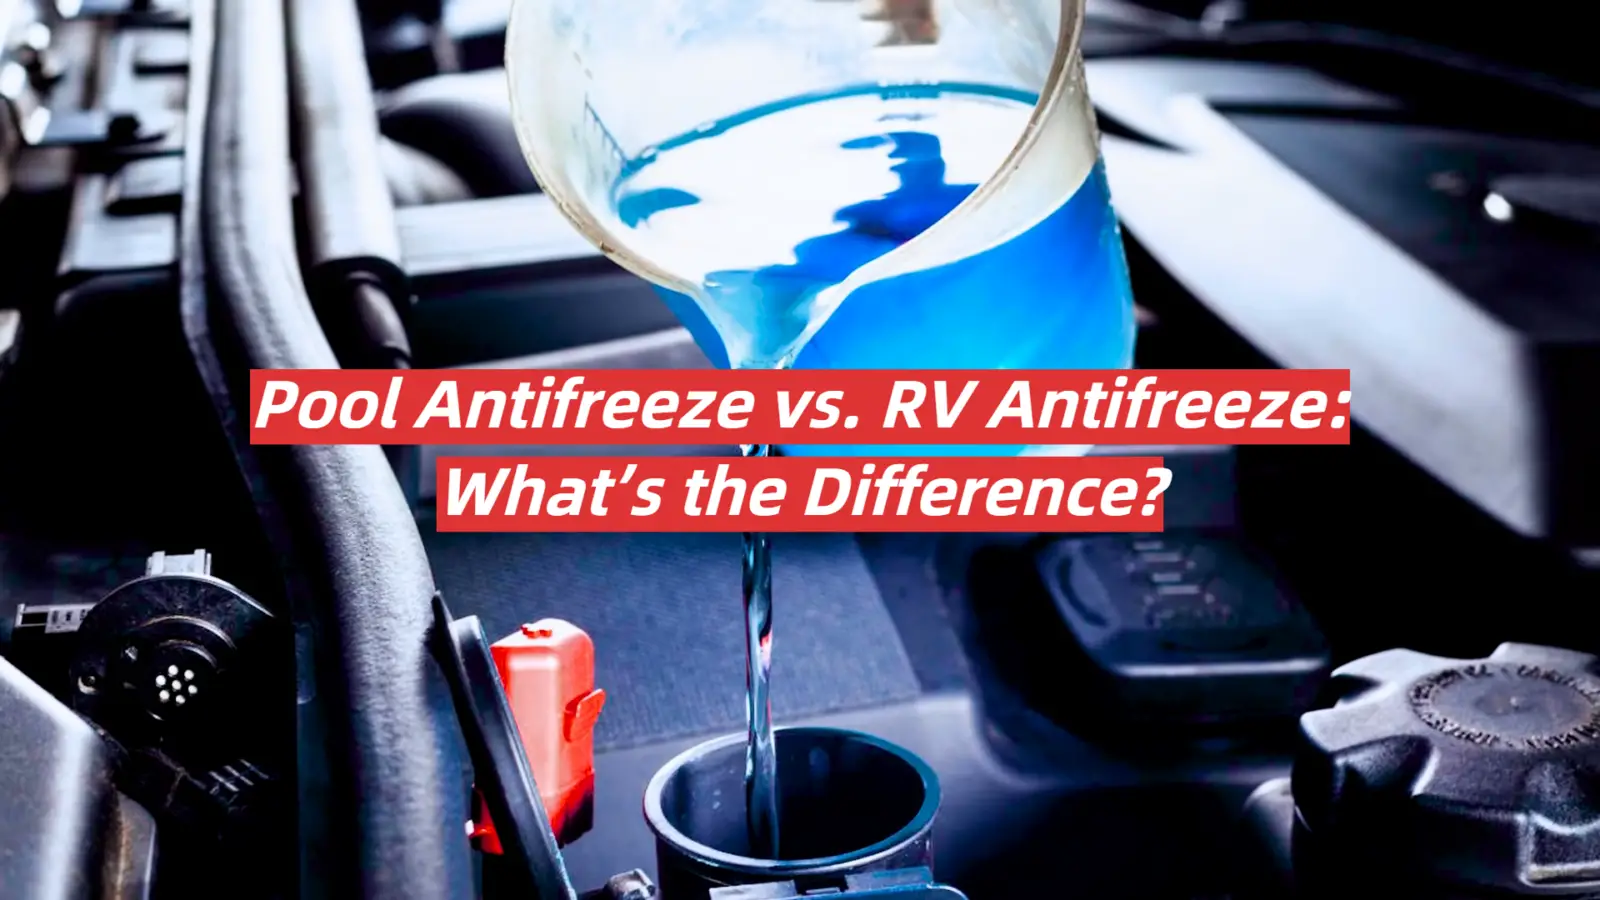 Pool Antifreeze vs. RV Antifreeze: What’s the Difference?